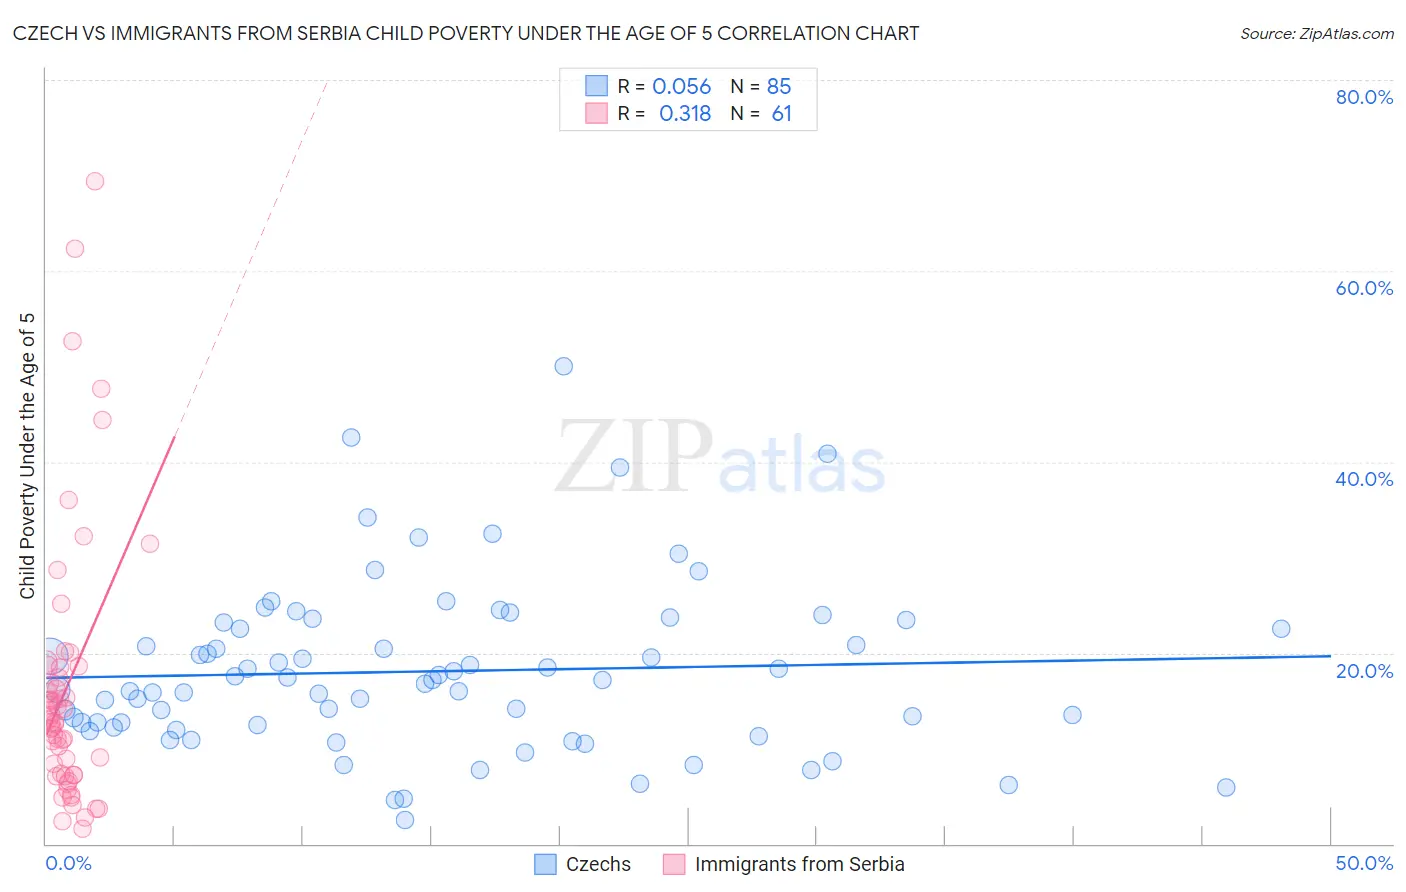 Czech vs Immigrants from Serbia Child Poverty Under the Age of 5